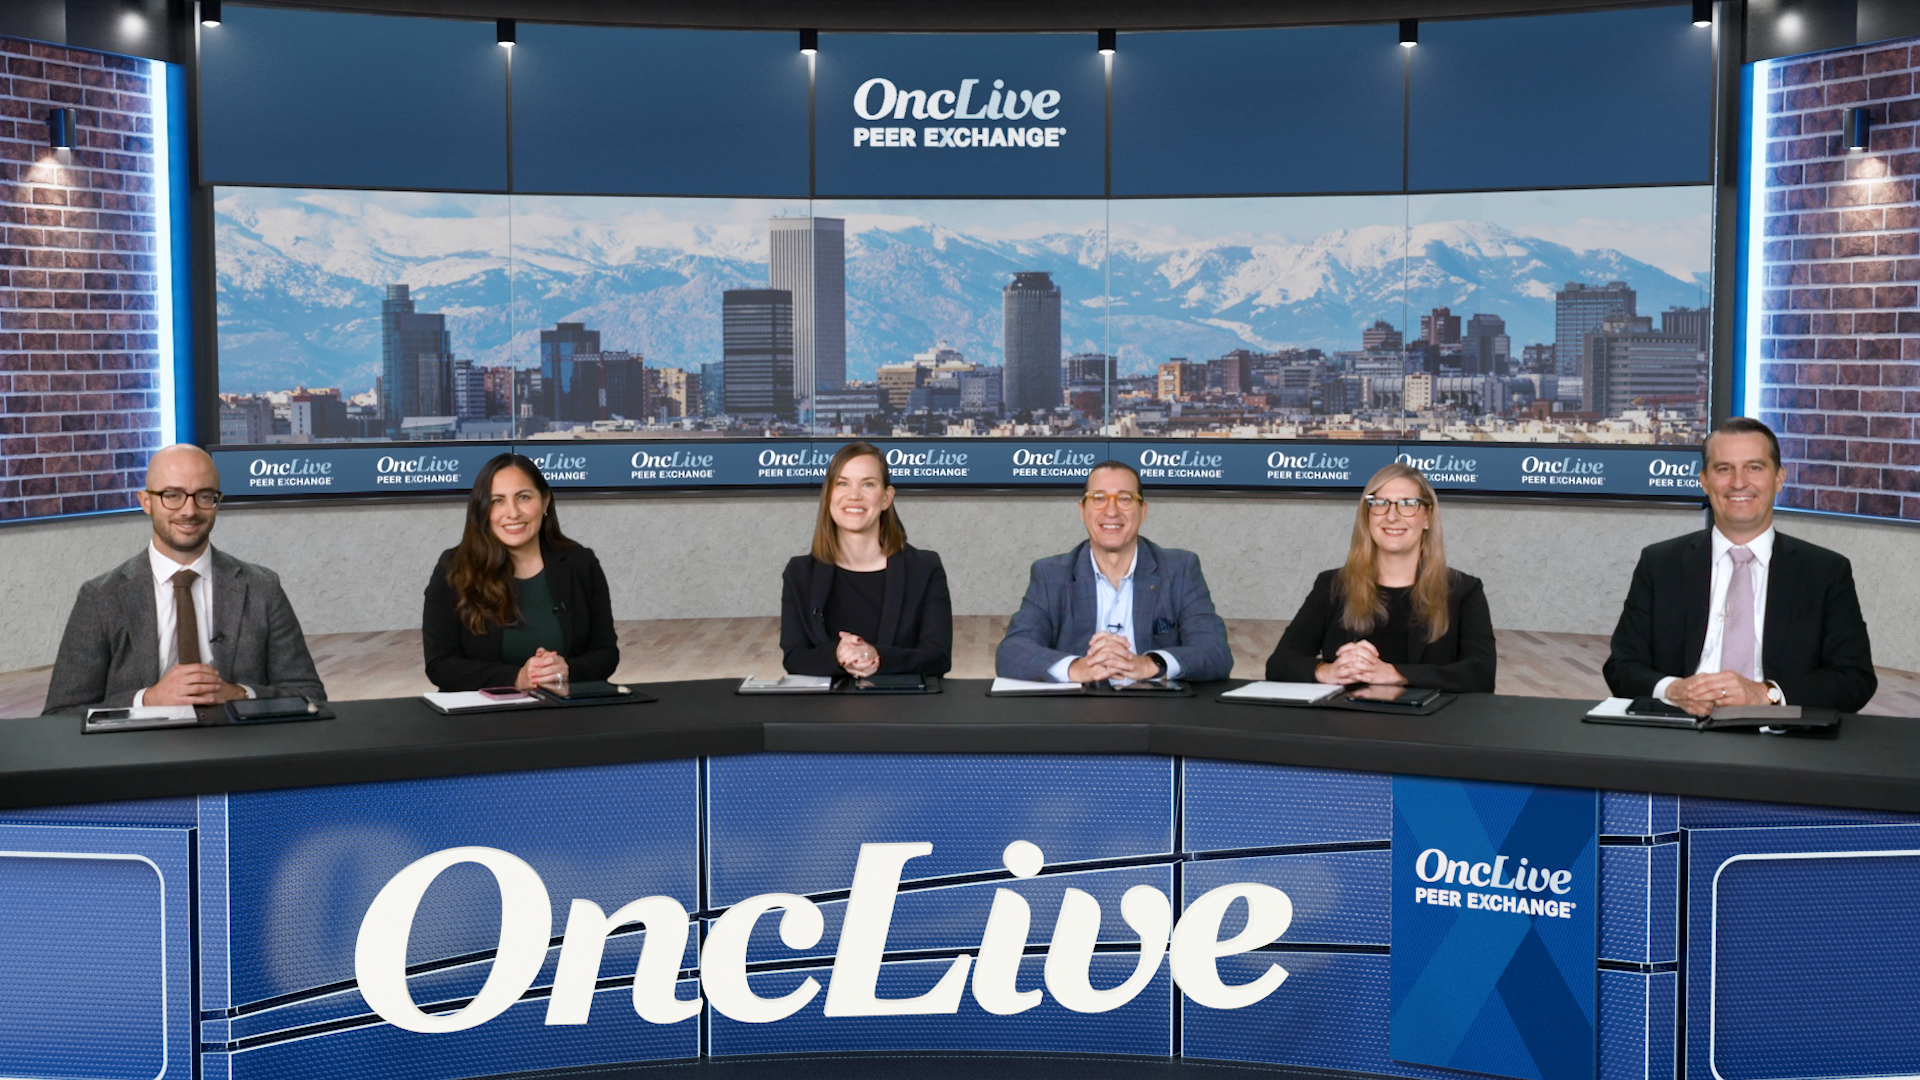 A panel of 6 experts on chronic lymphocytic leukemia seated at a long desk